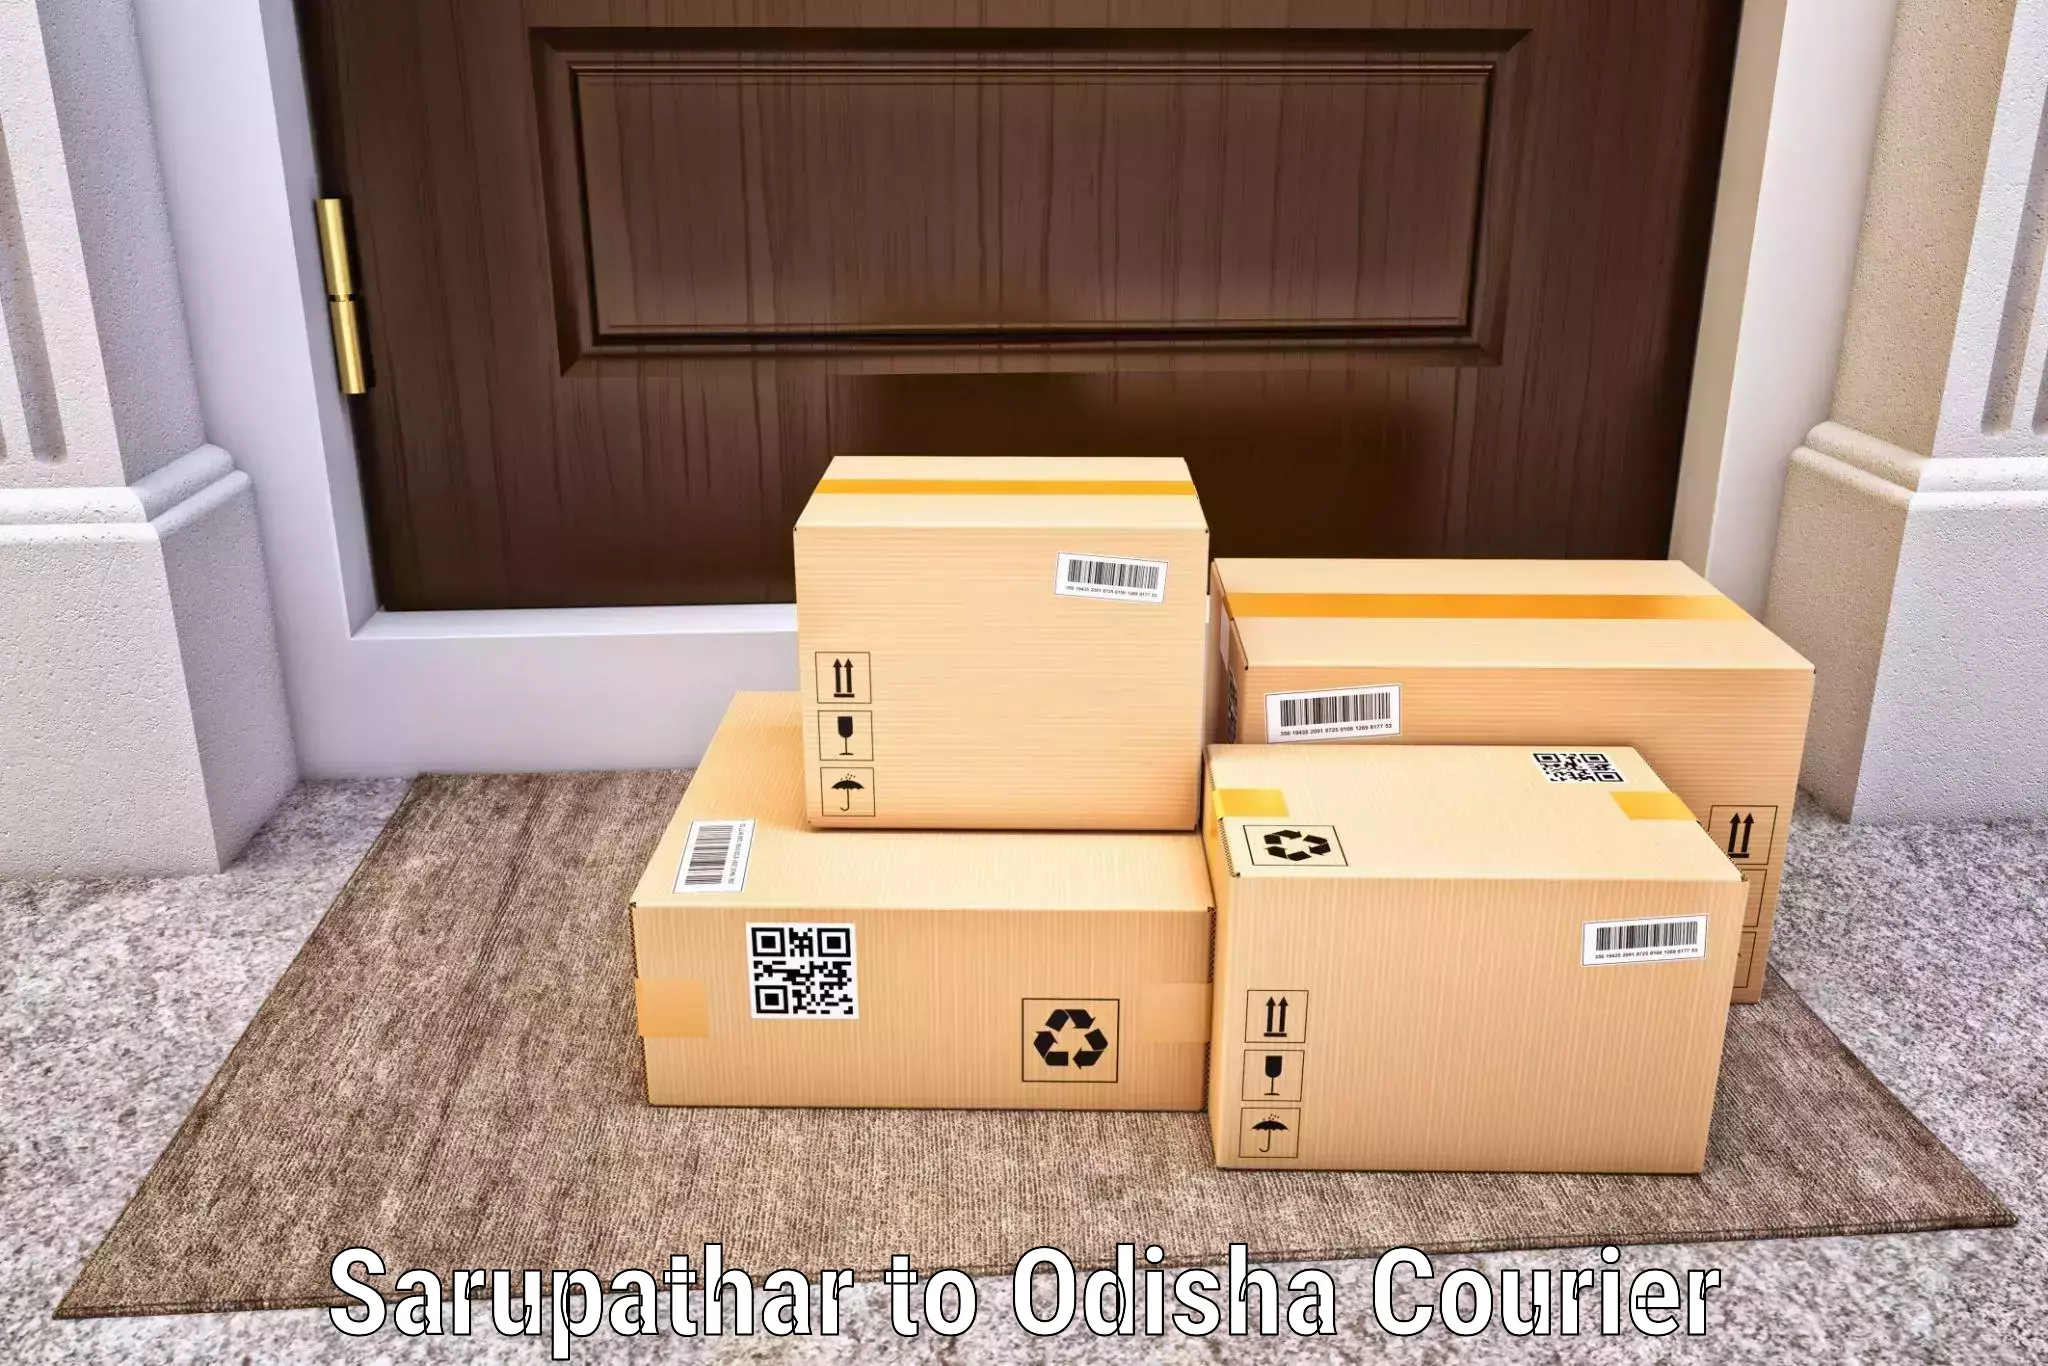 Courier services in Sarupathar to Lahunipara